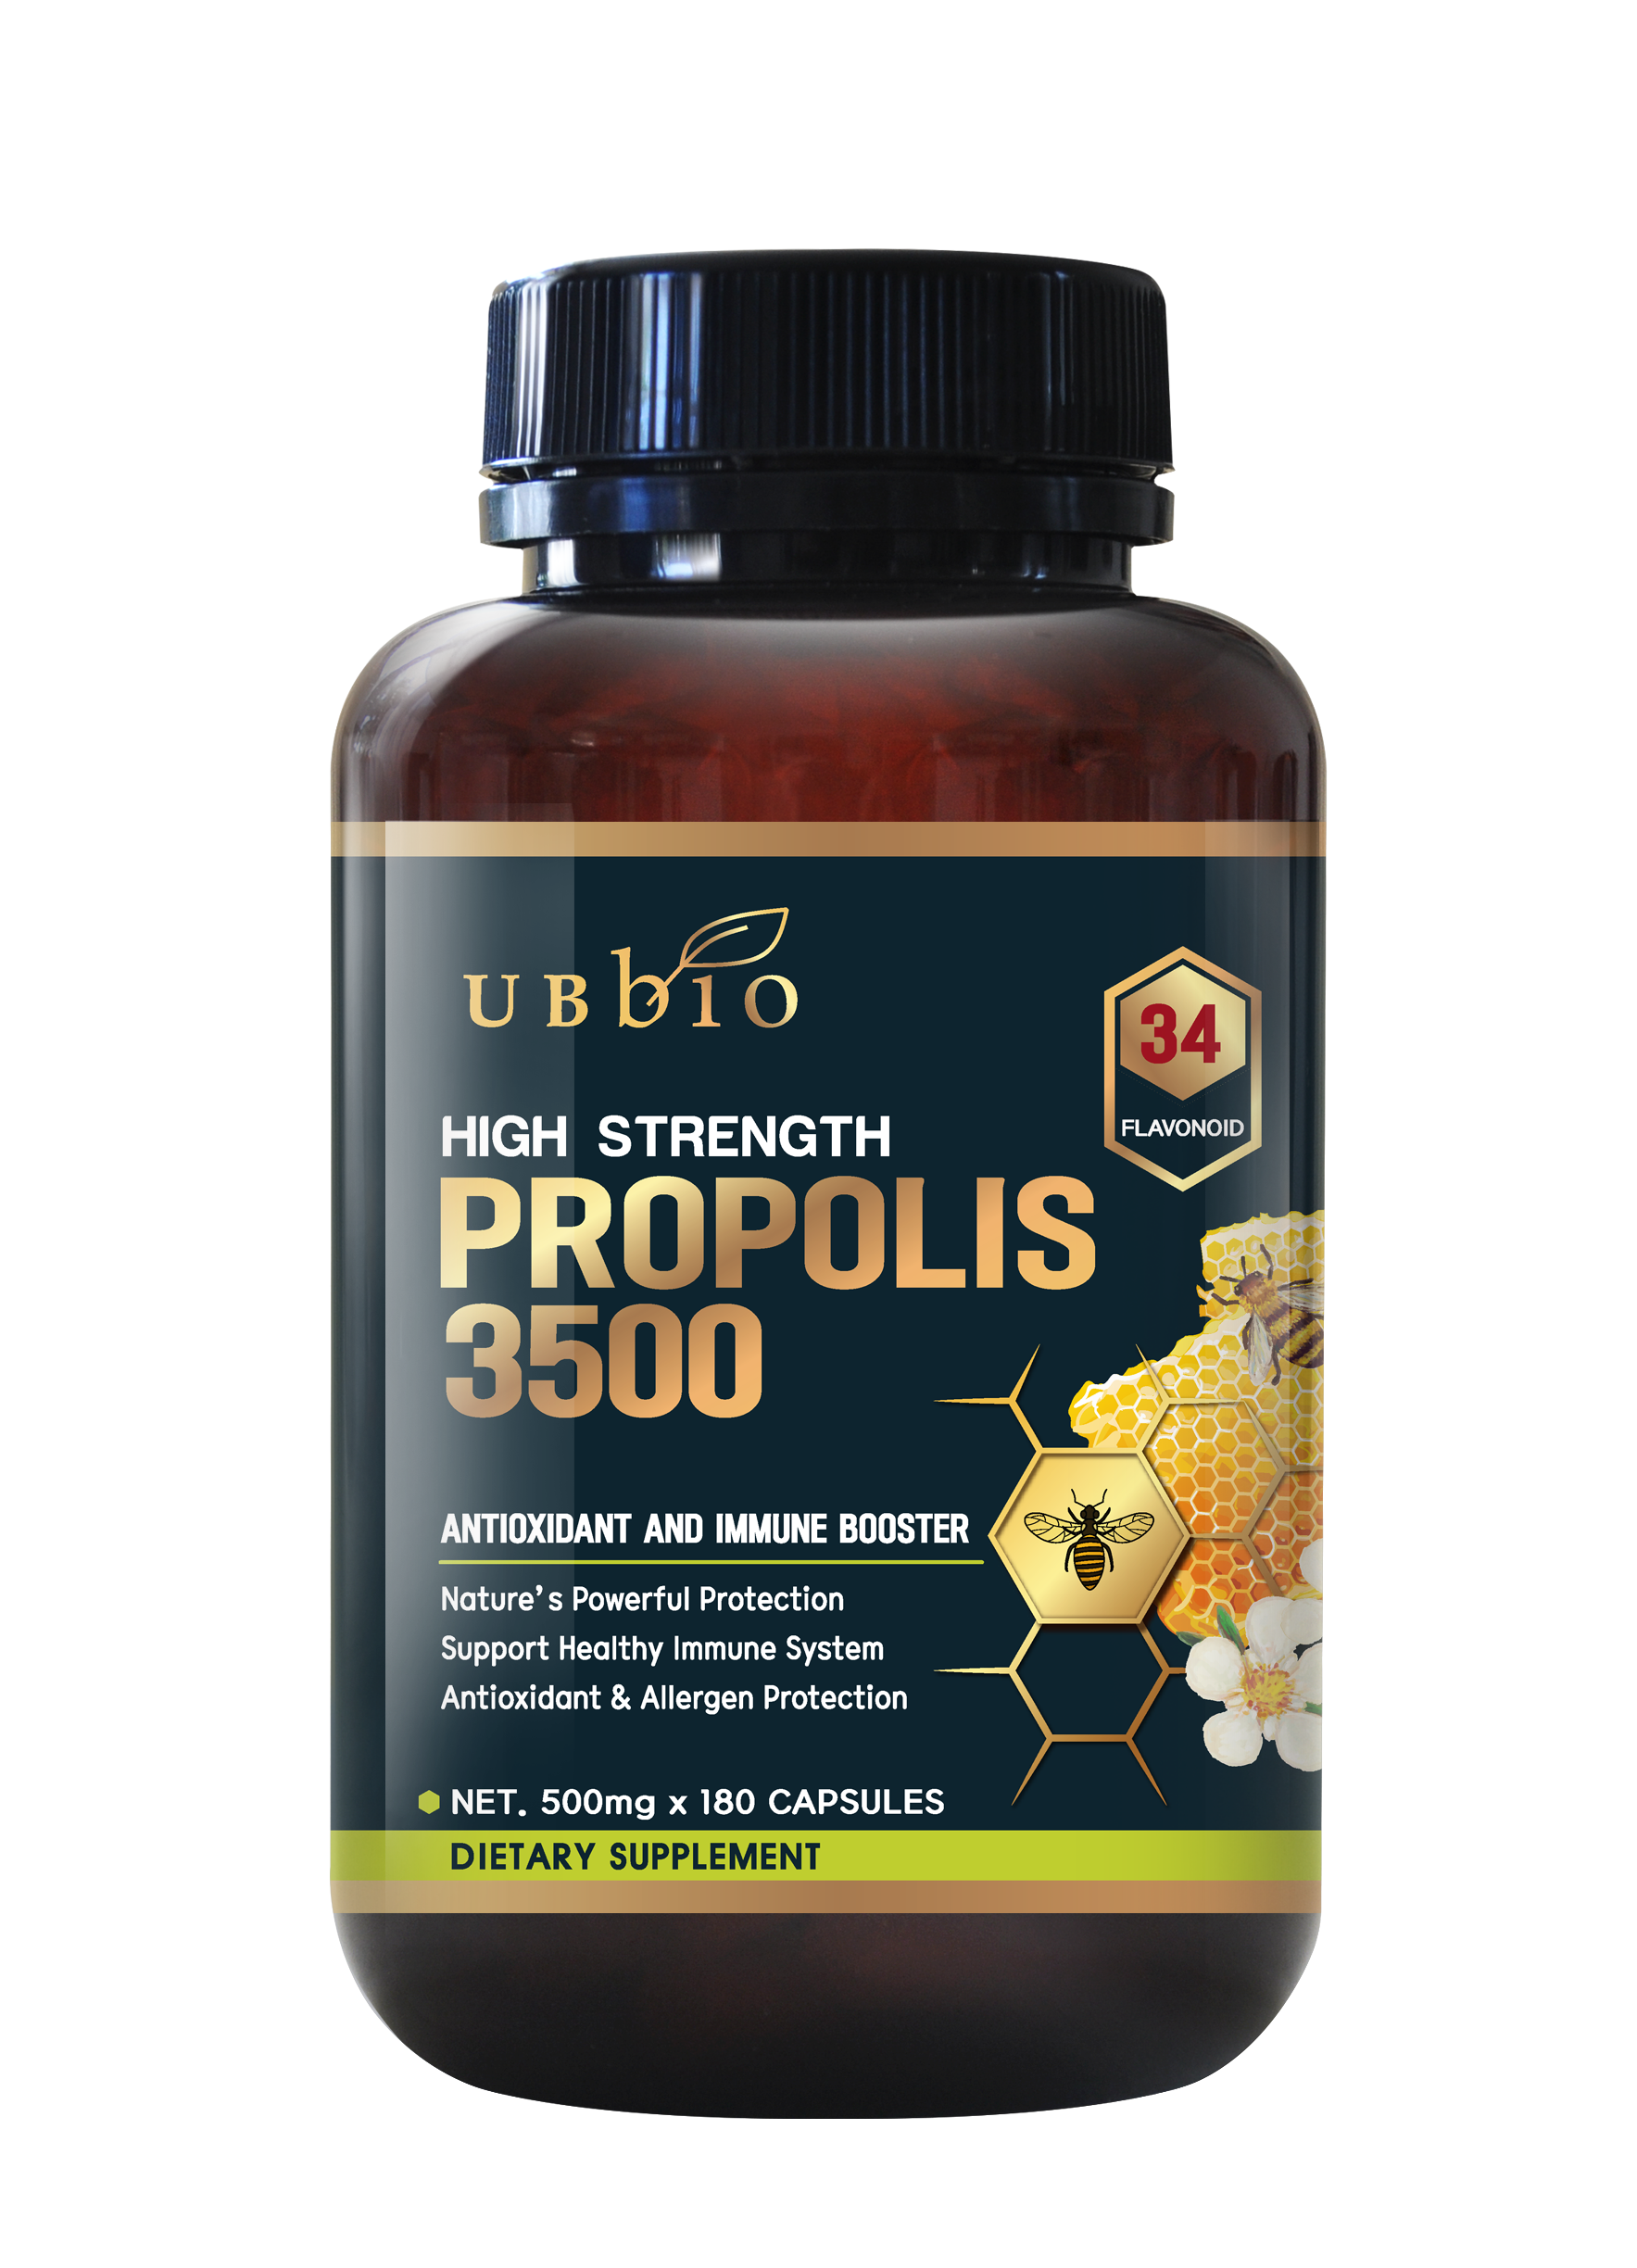 Scientists recommend taking propolis to prevent COVID – 19